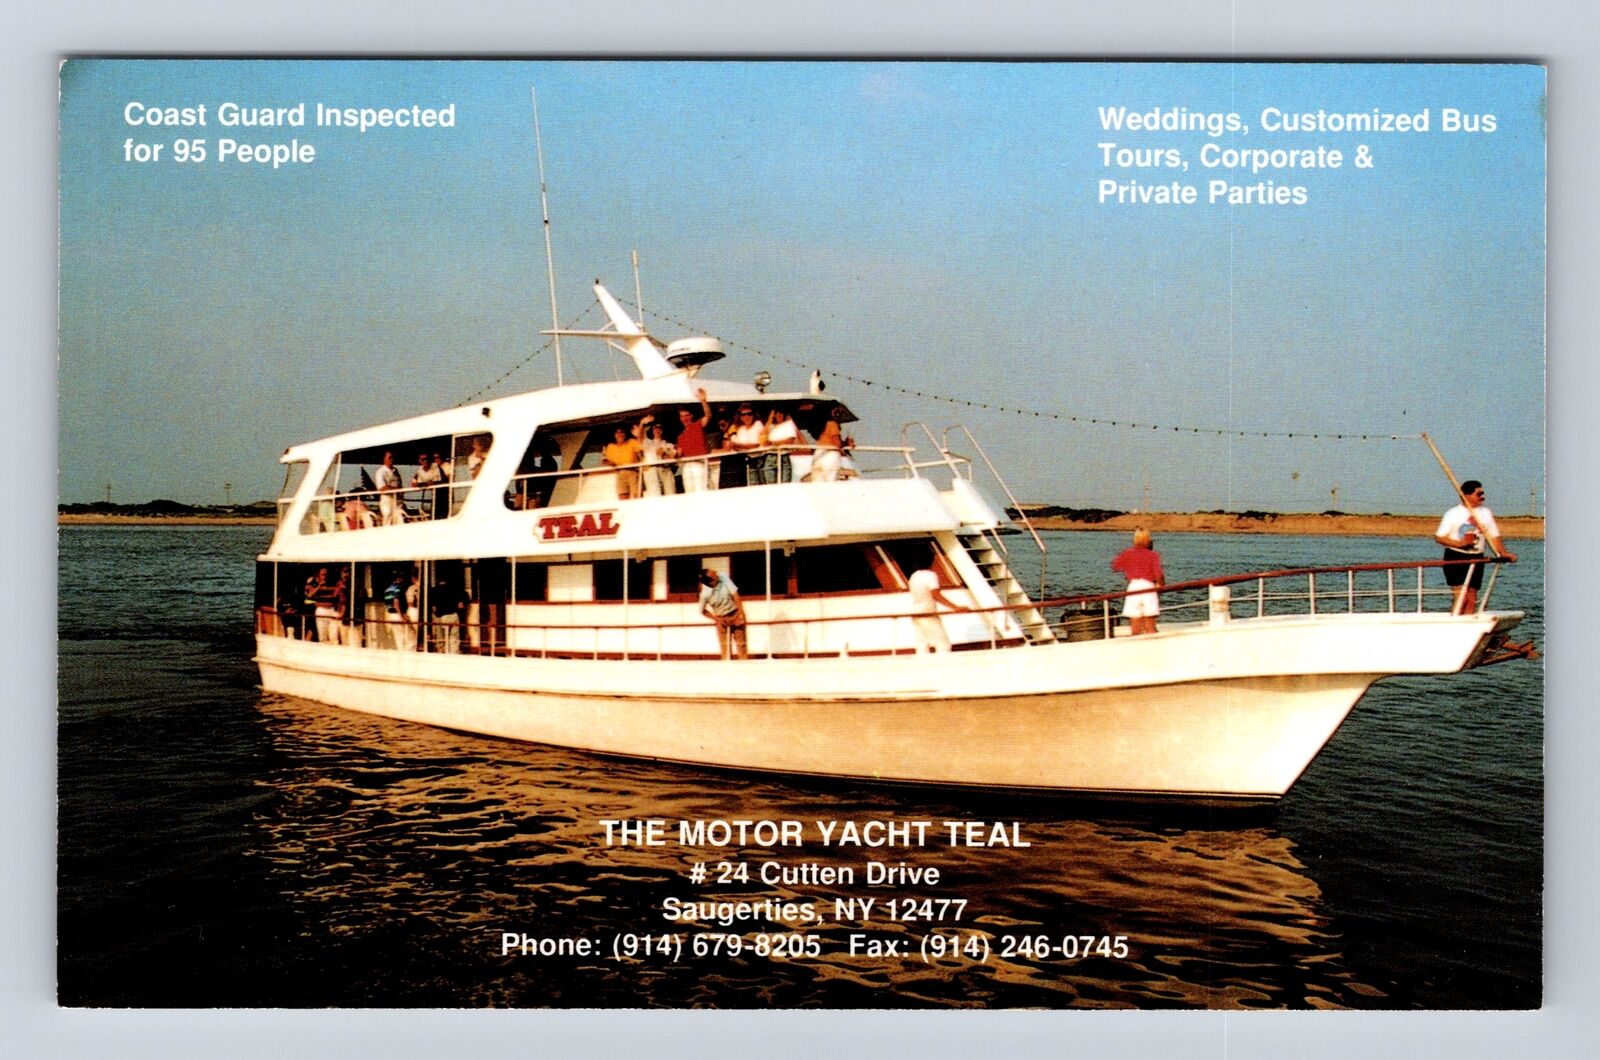 Saugerties NY-New York, The Motor Yacht Teal, Advertising, Vintage Postcard